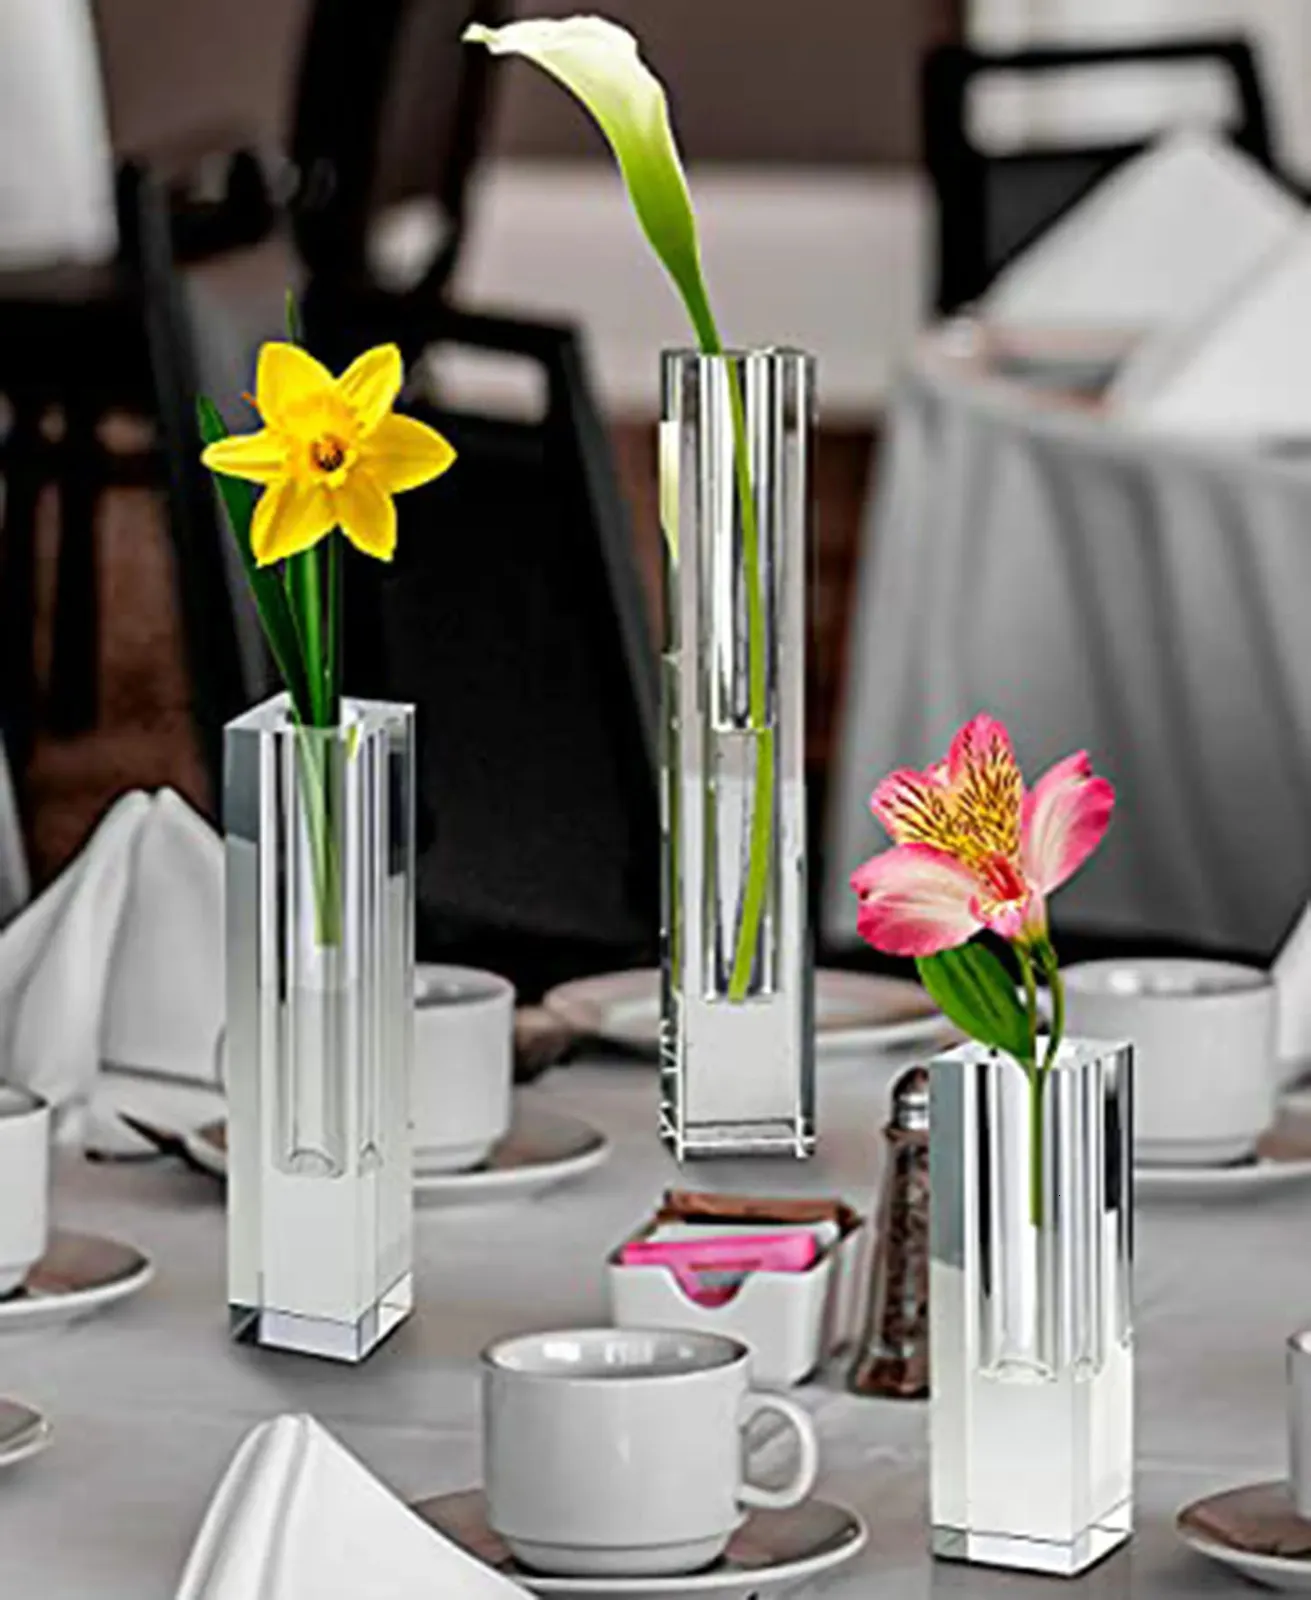 Crystal Square Bud Vase Decorative Single Flower Vase for Wedding Centerpieces Events Partier Home Accenters 240415